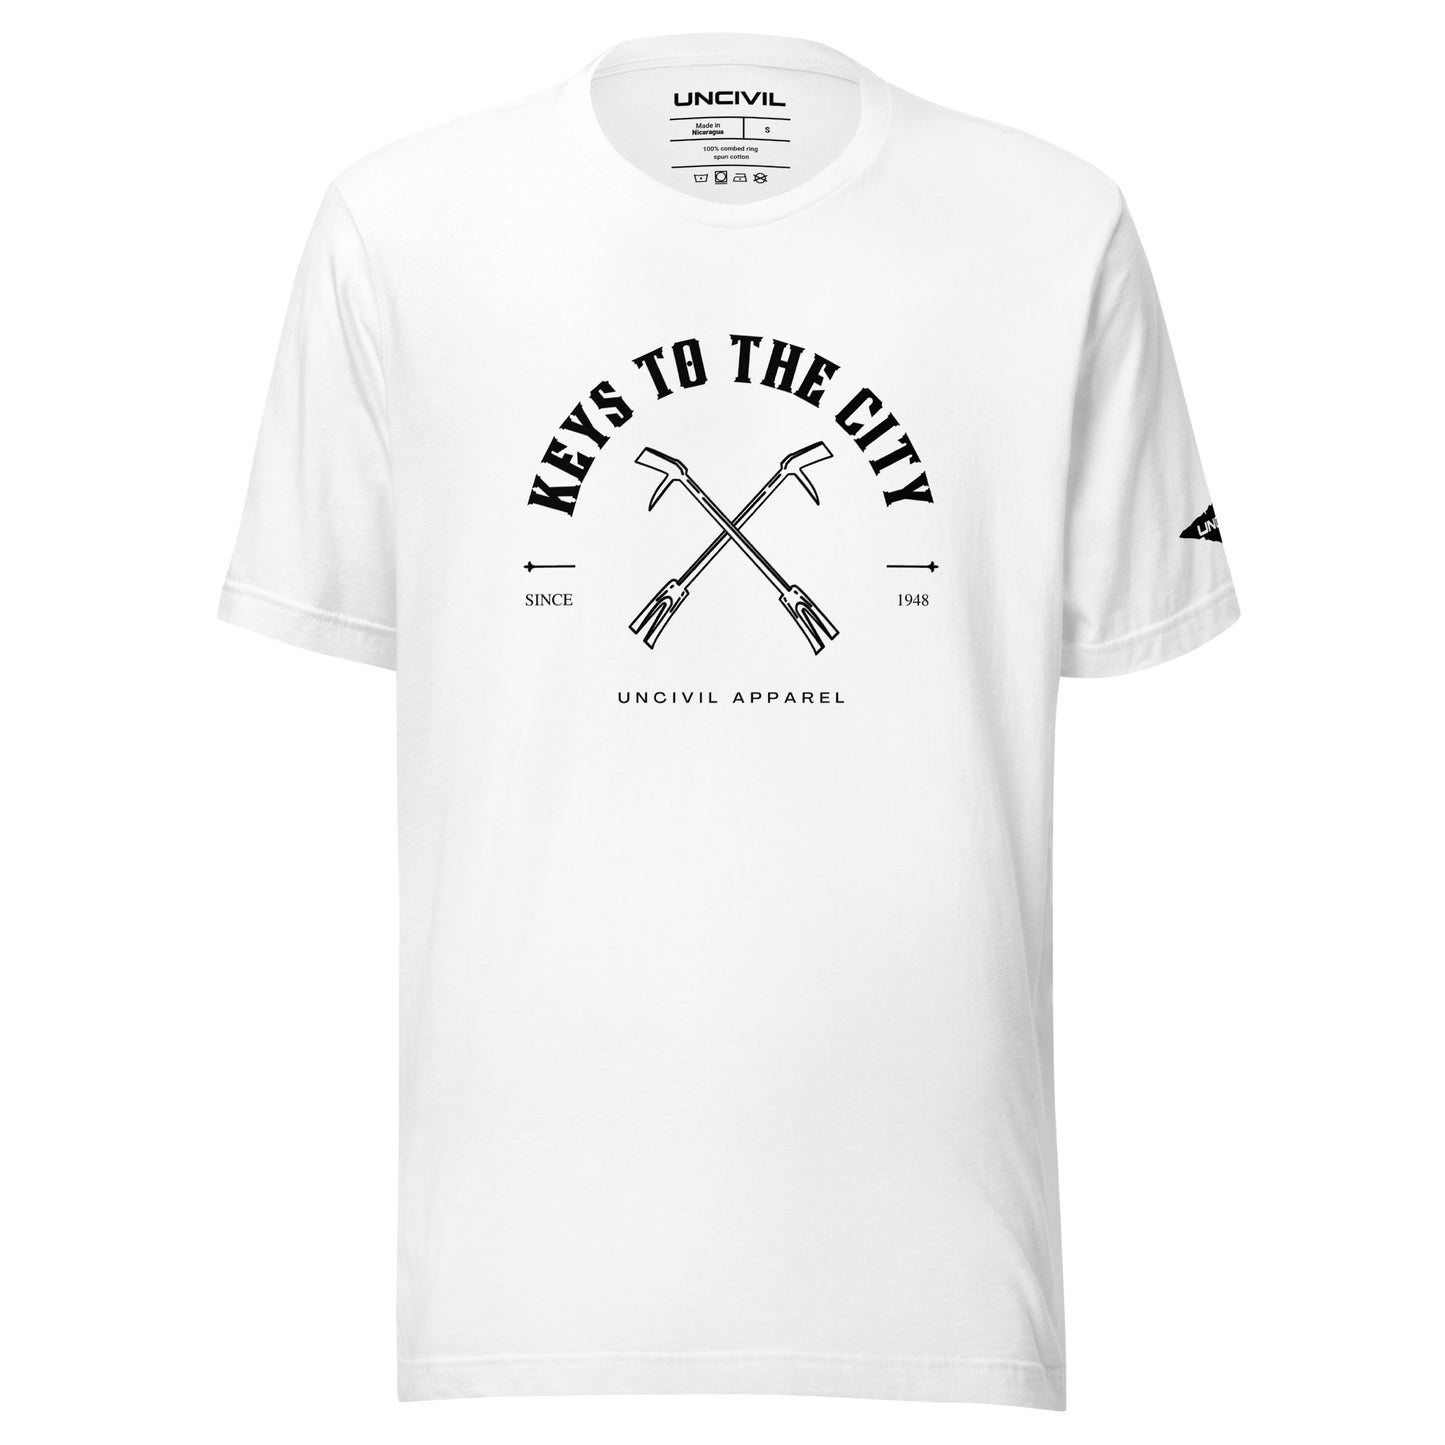 Keys to the City, Halligan Bar Design, White Unisex T-shirt for Firefighters